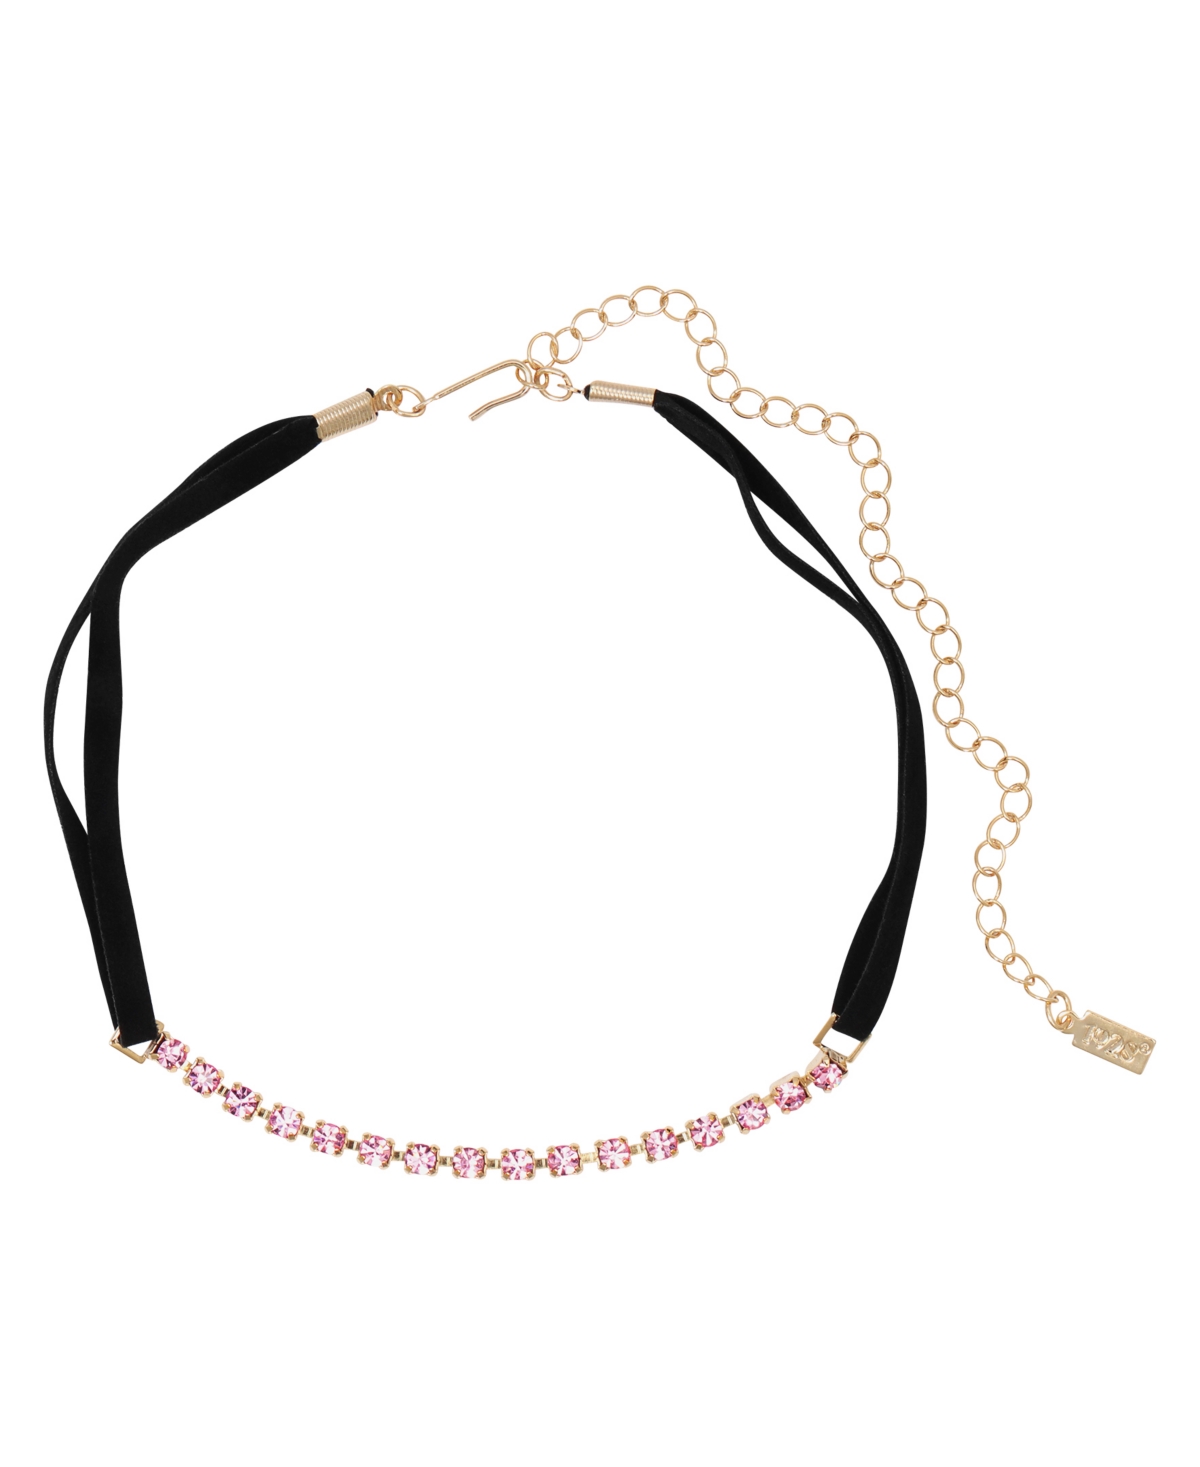 Pink Crystal Black Faux Suede Choker Necklace - Pink